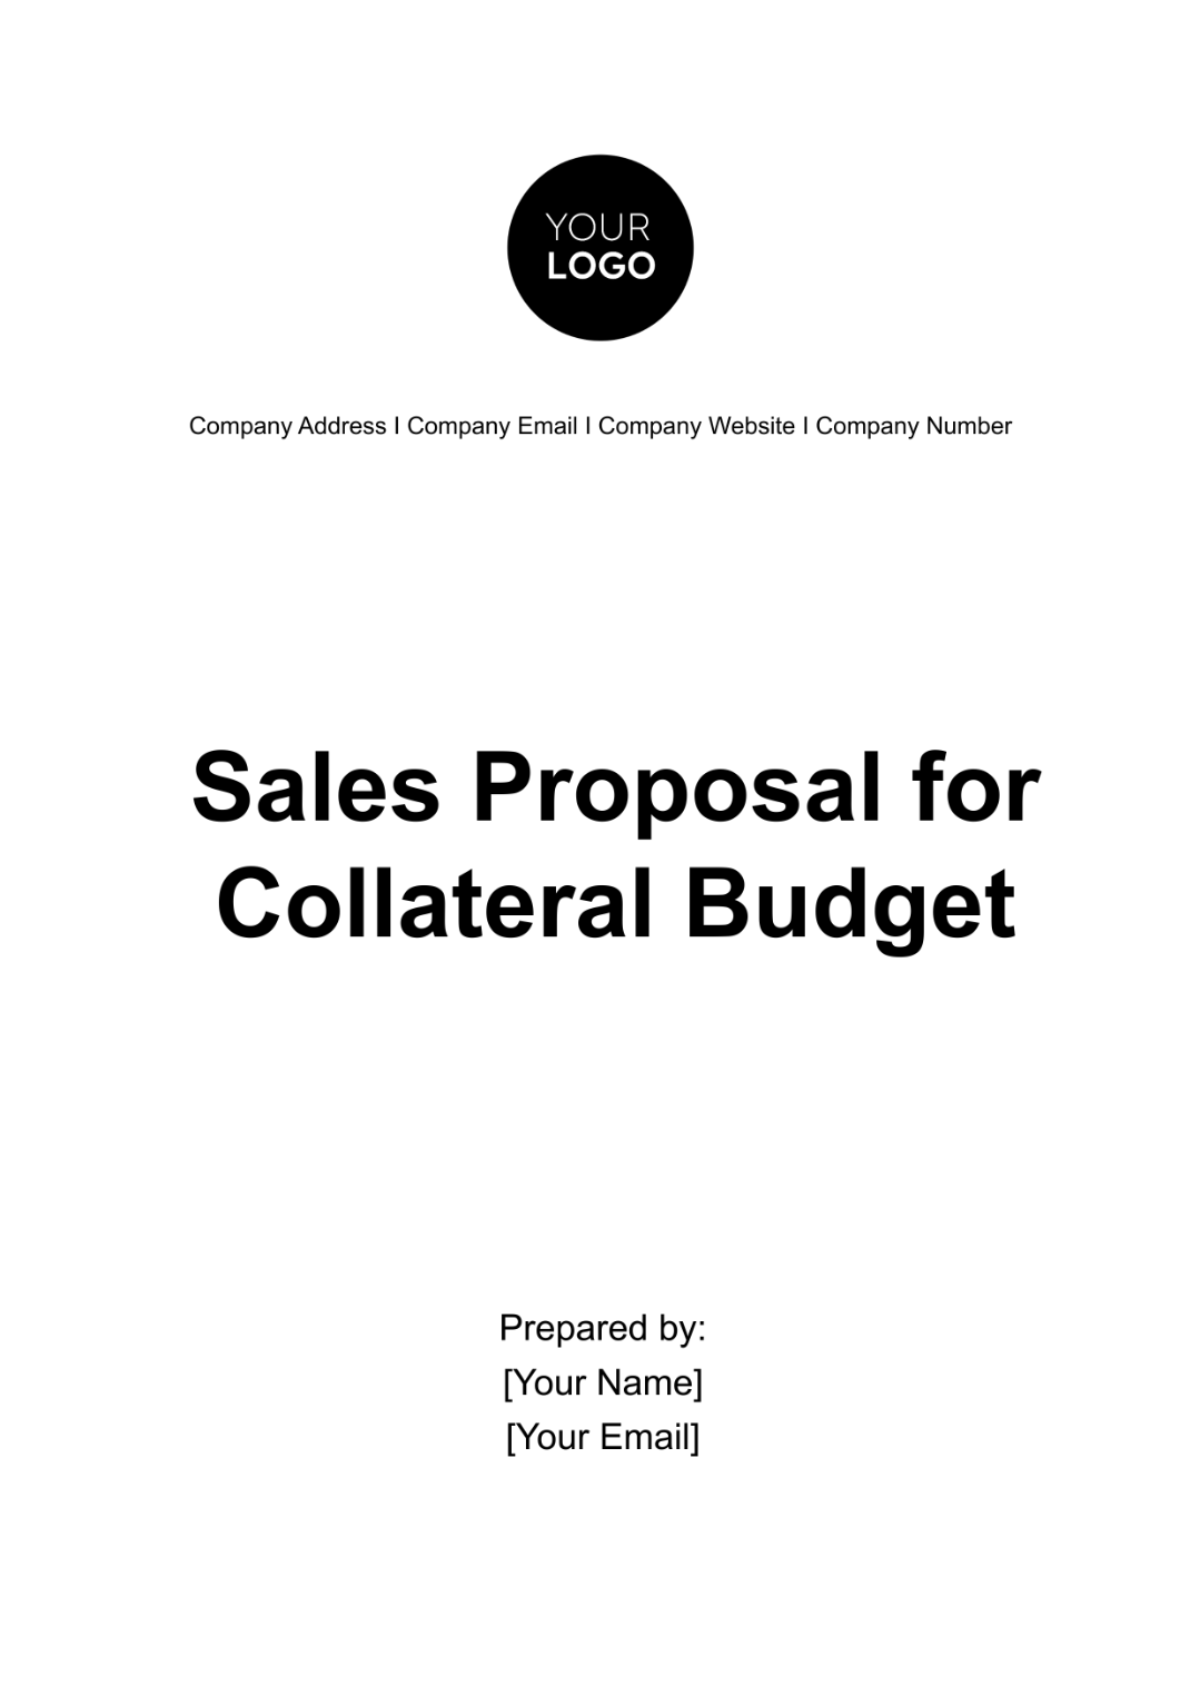 Free Sales Proposal for Collateral Budget Template